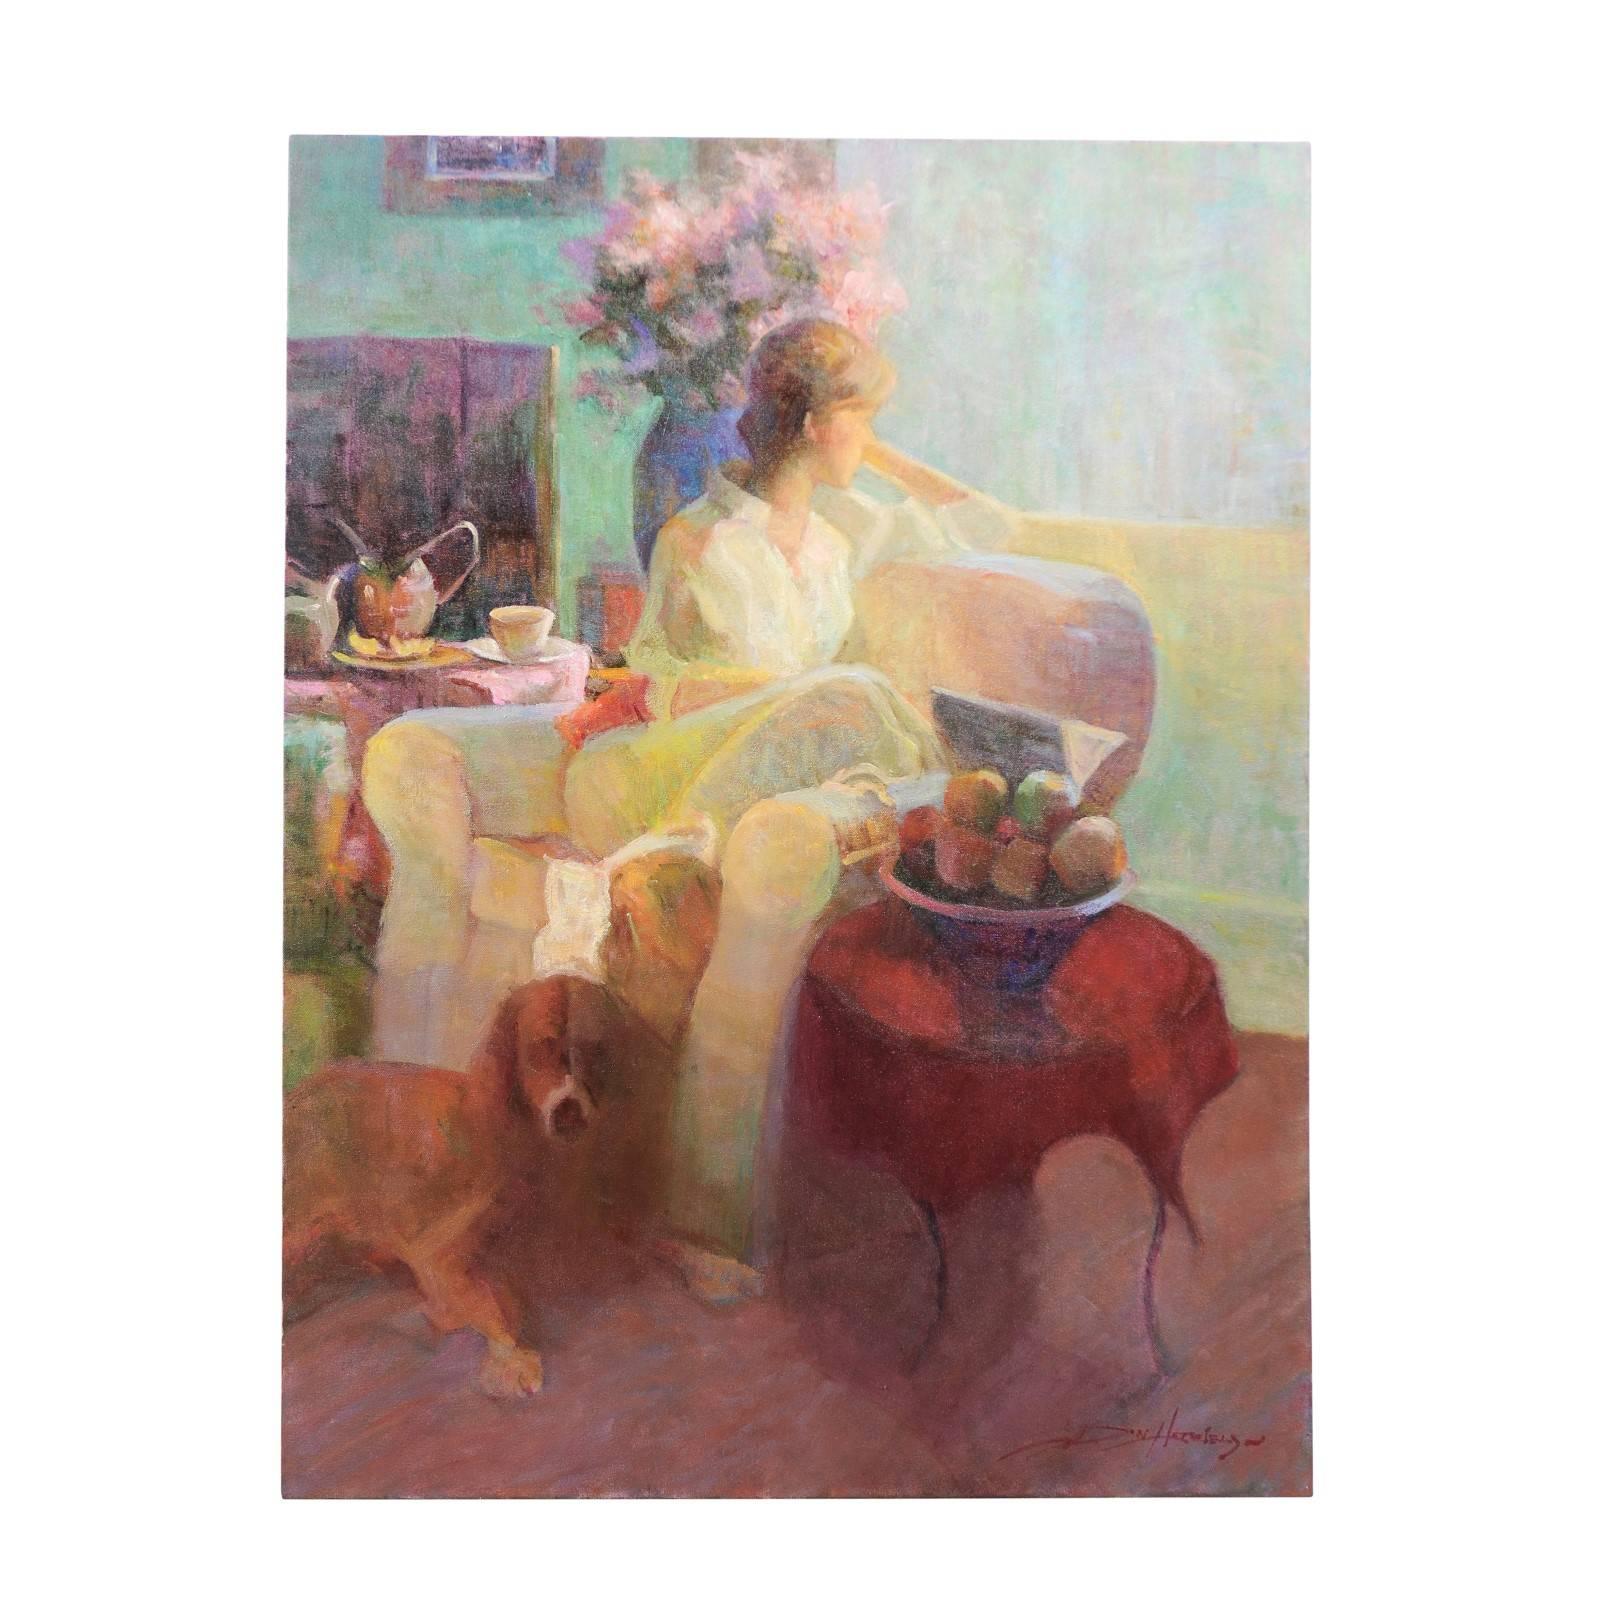 'Quiet Morning' is a contemporary framed oil painting created by American artist Don Hatfield (1947 - Present). Featuring a vertical format, this painting depicts an interior scene, centered around a contemplative young woman, her face turned away